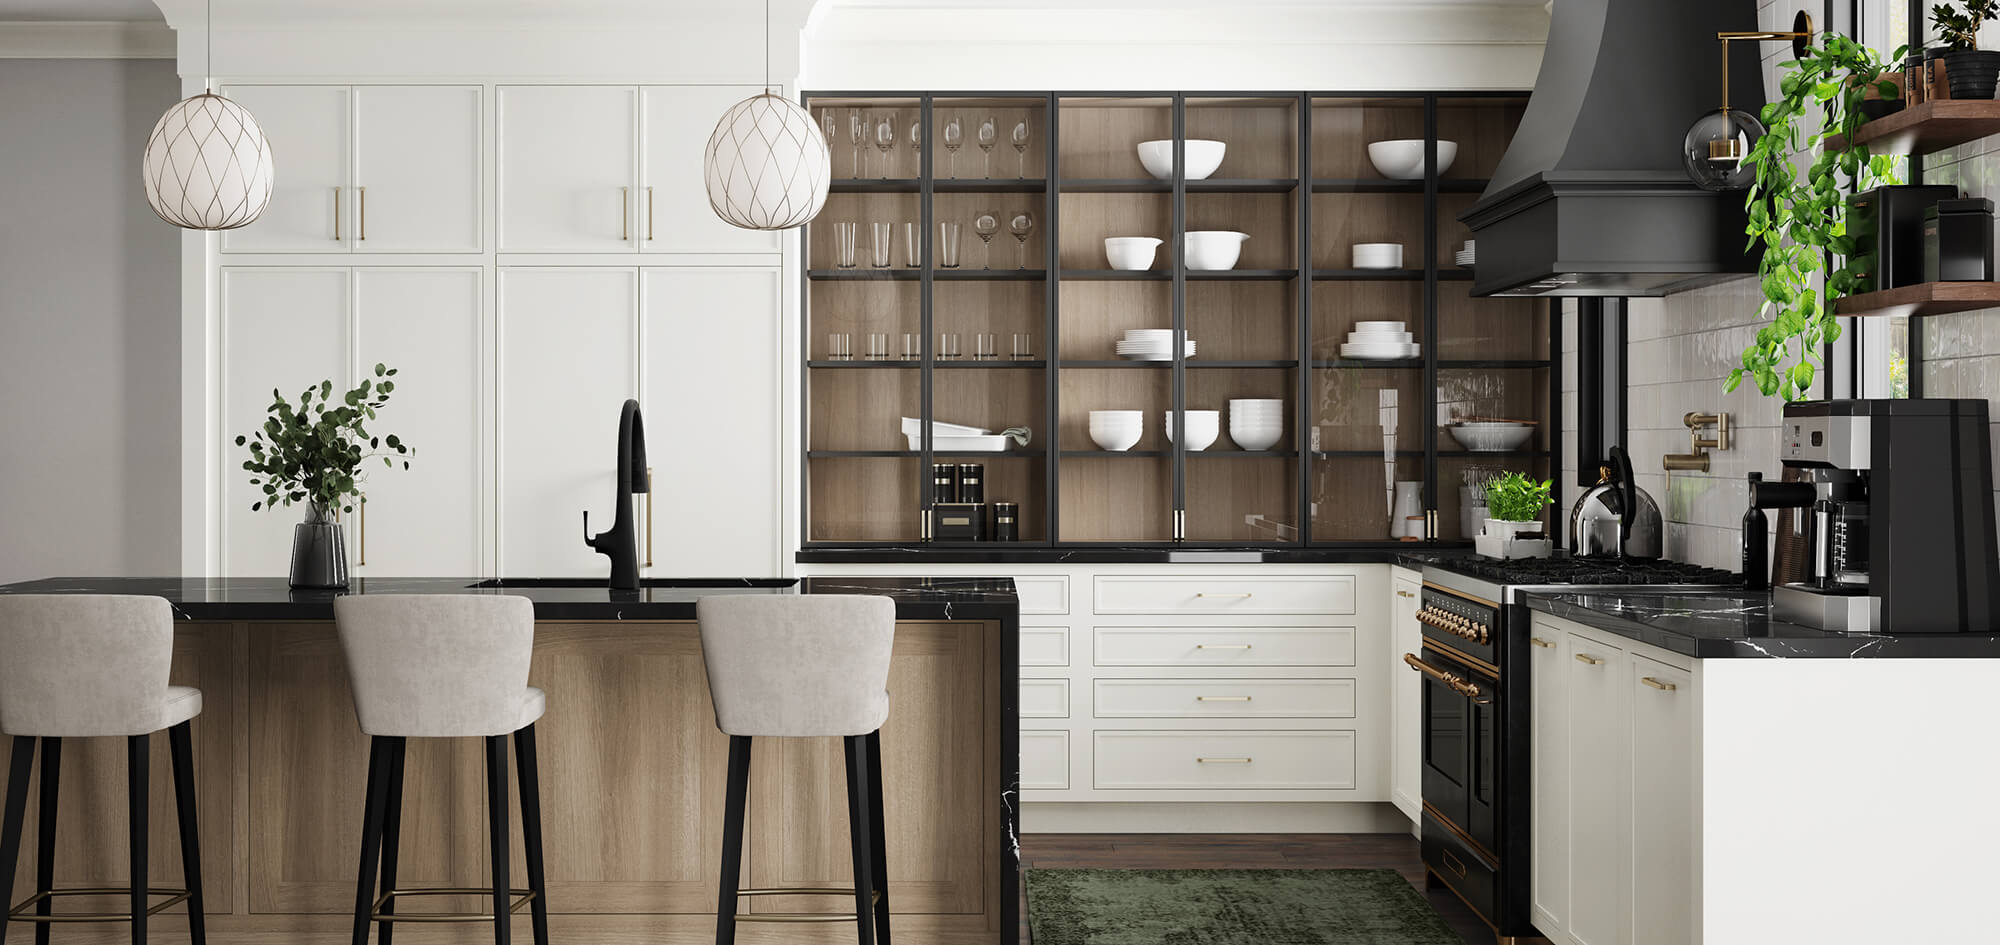 A beautiful black and white kitchen with skinny shaker doors with inset construction.